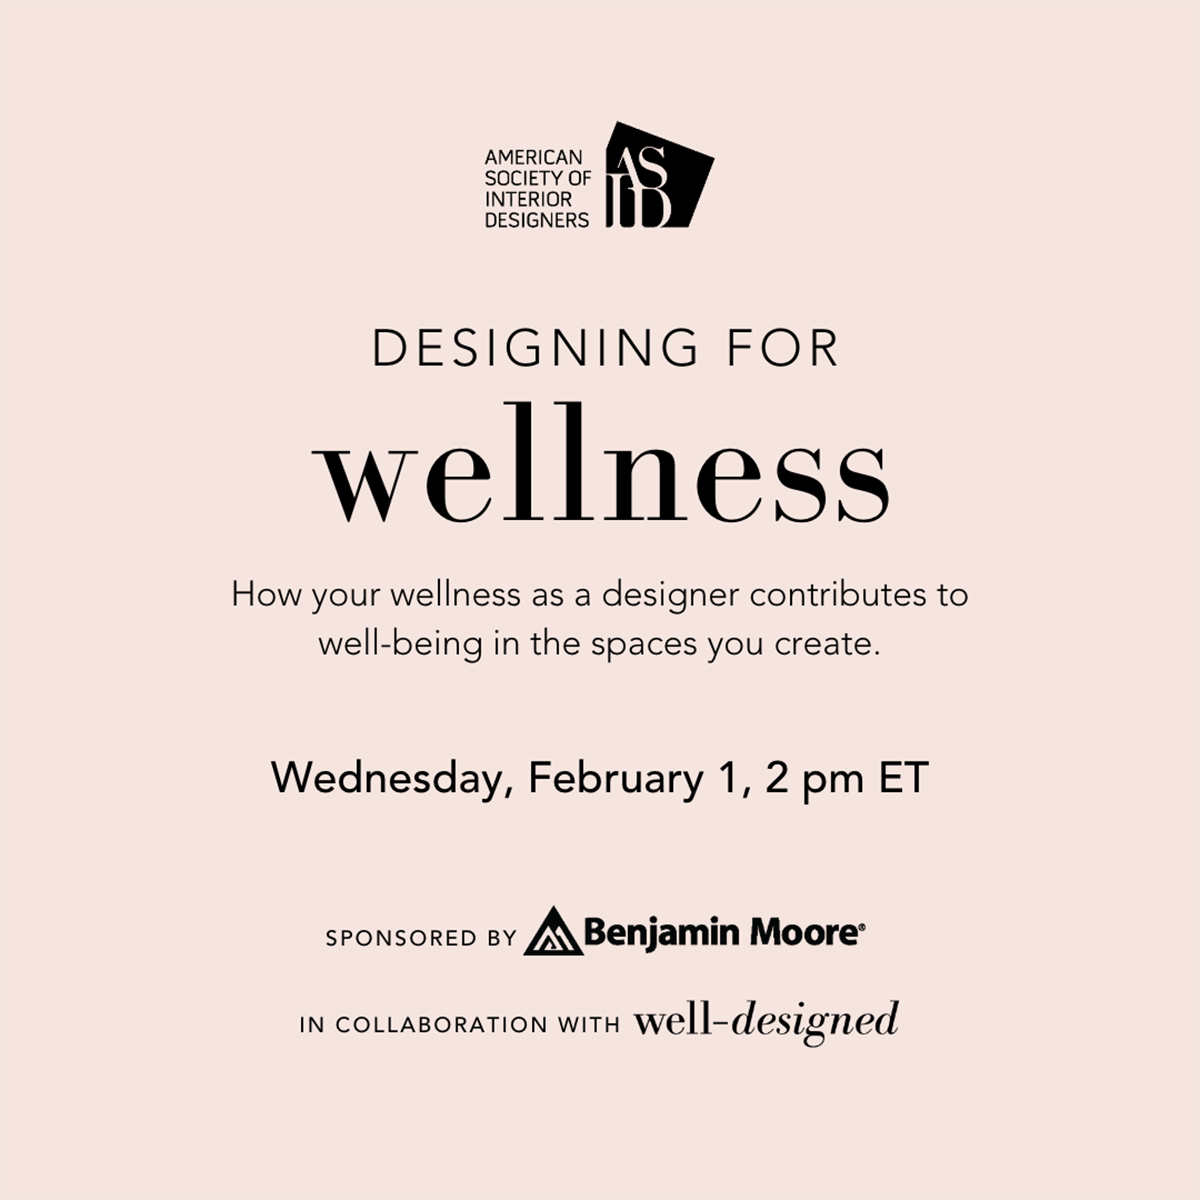 asid designing for wellness